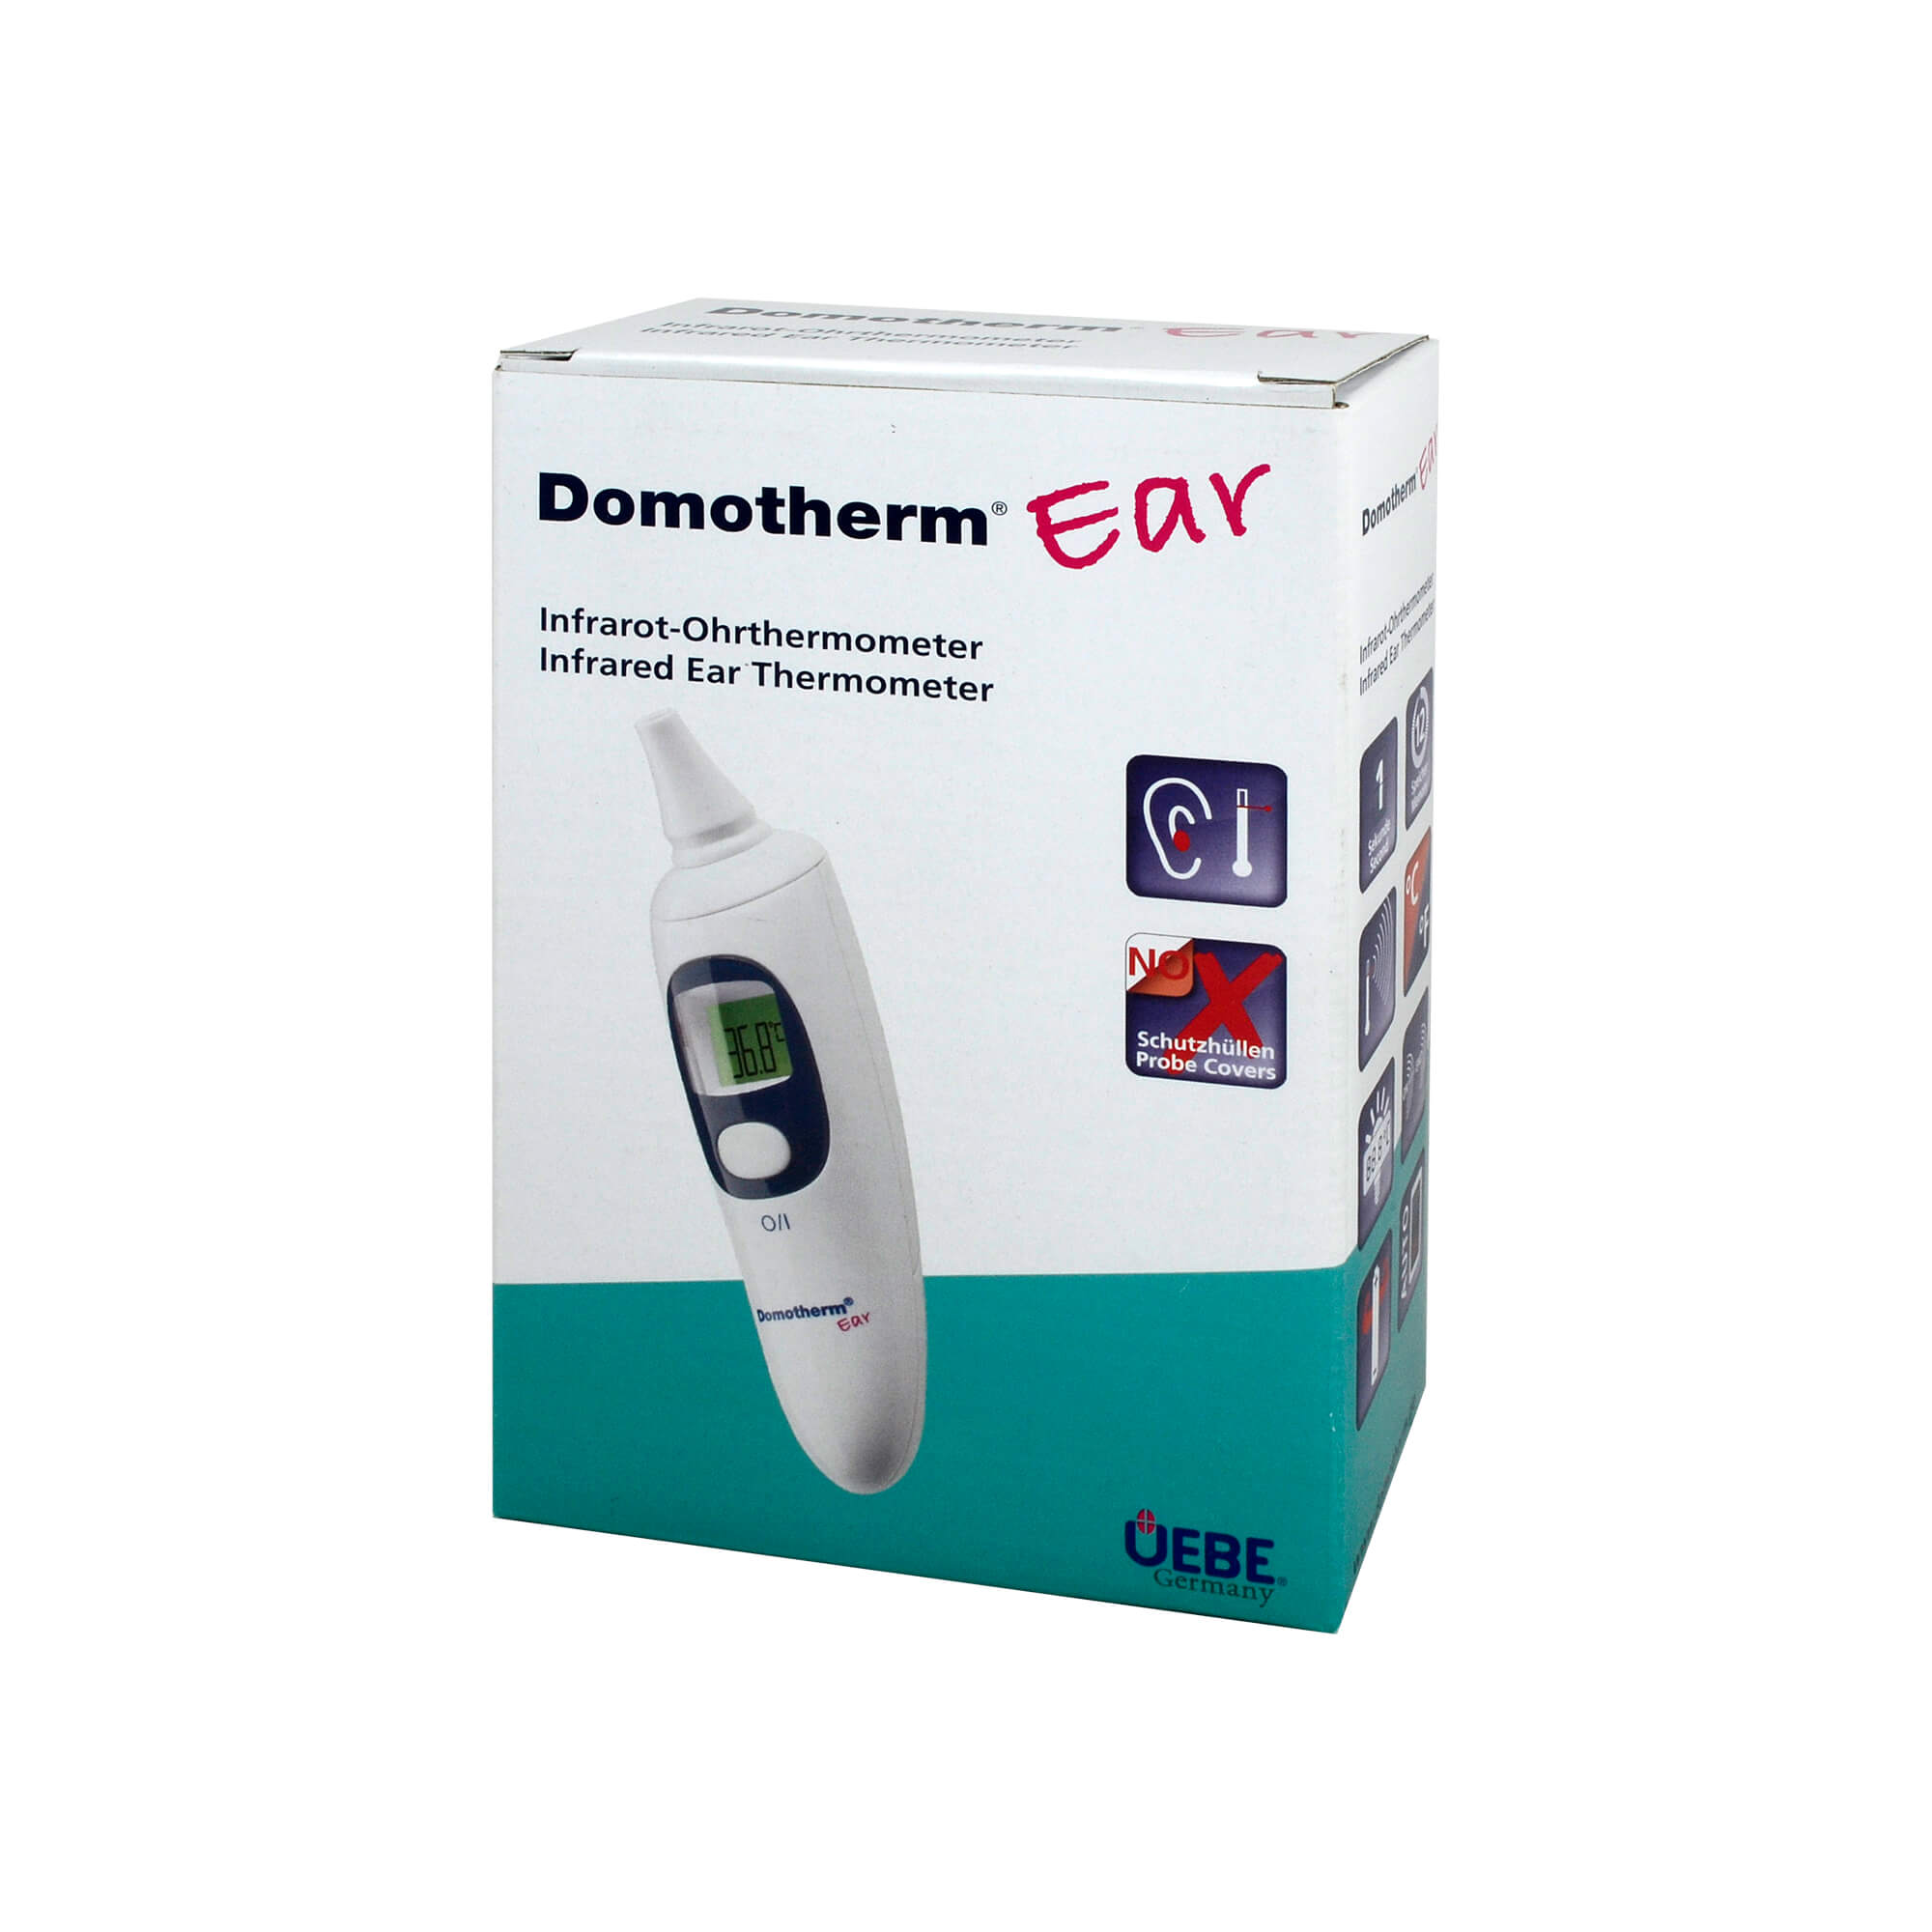 Digitales Infrarot Ohr-Thermometer.